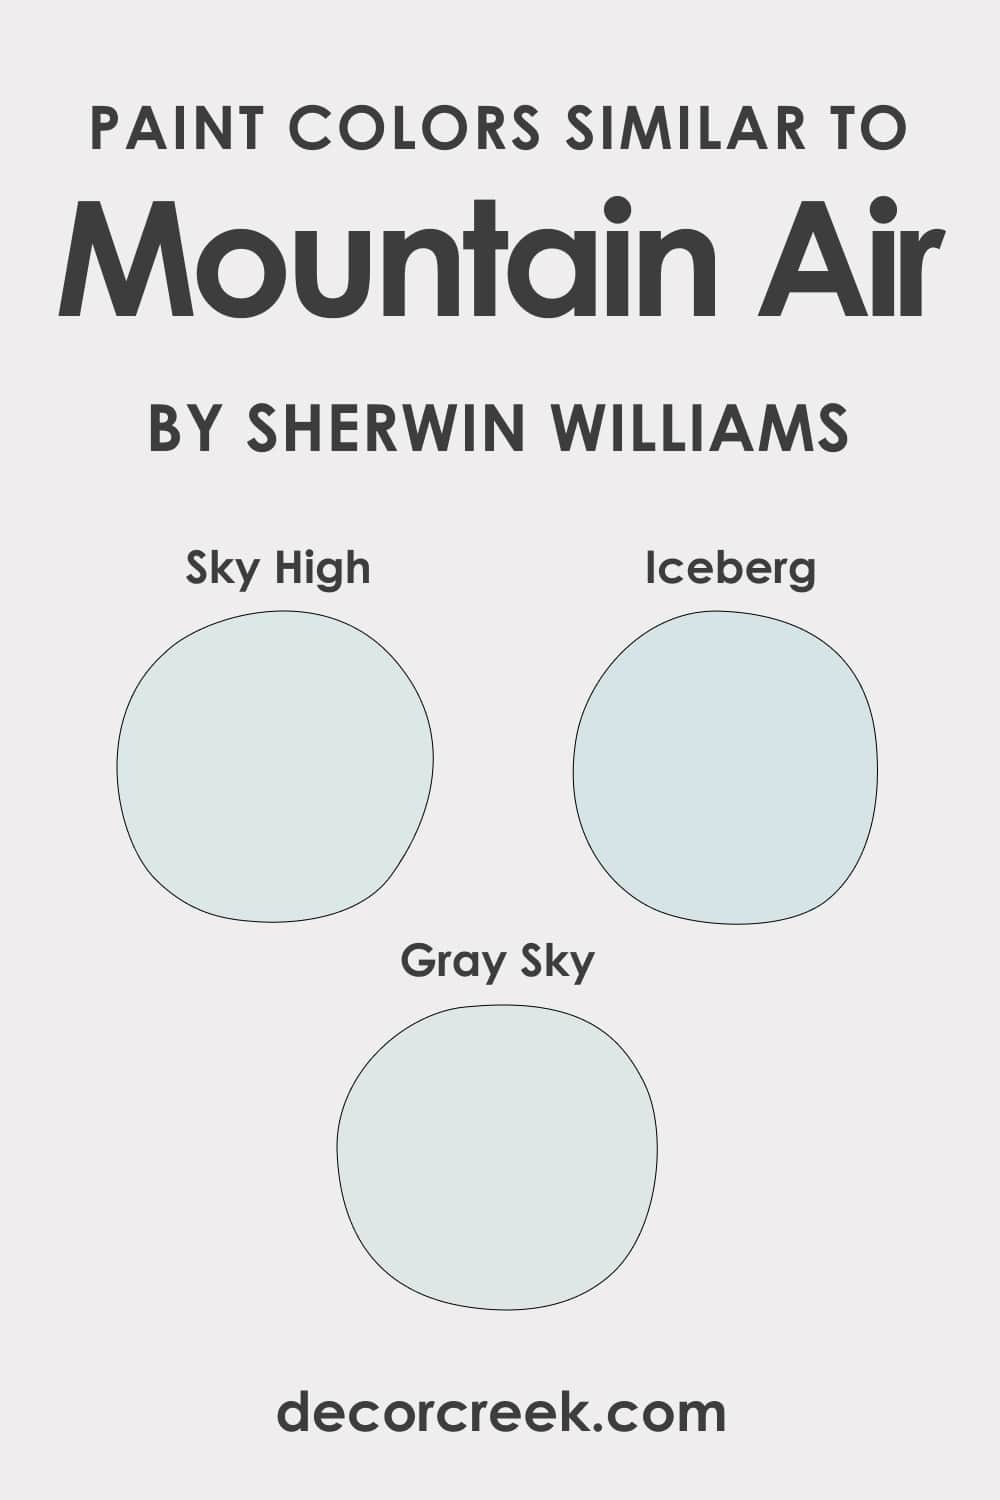 Similar Colors of SW Mountain Air